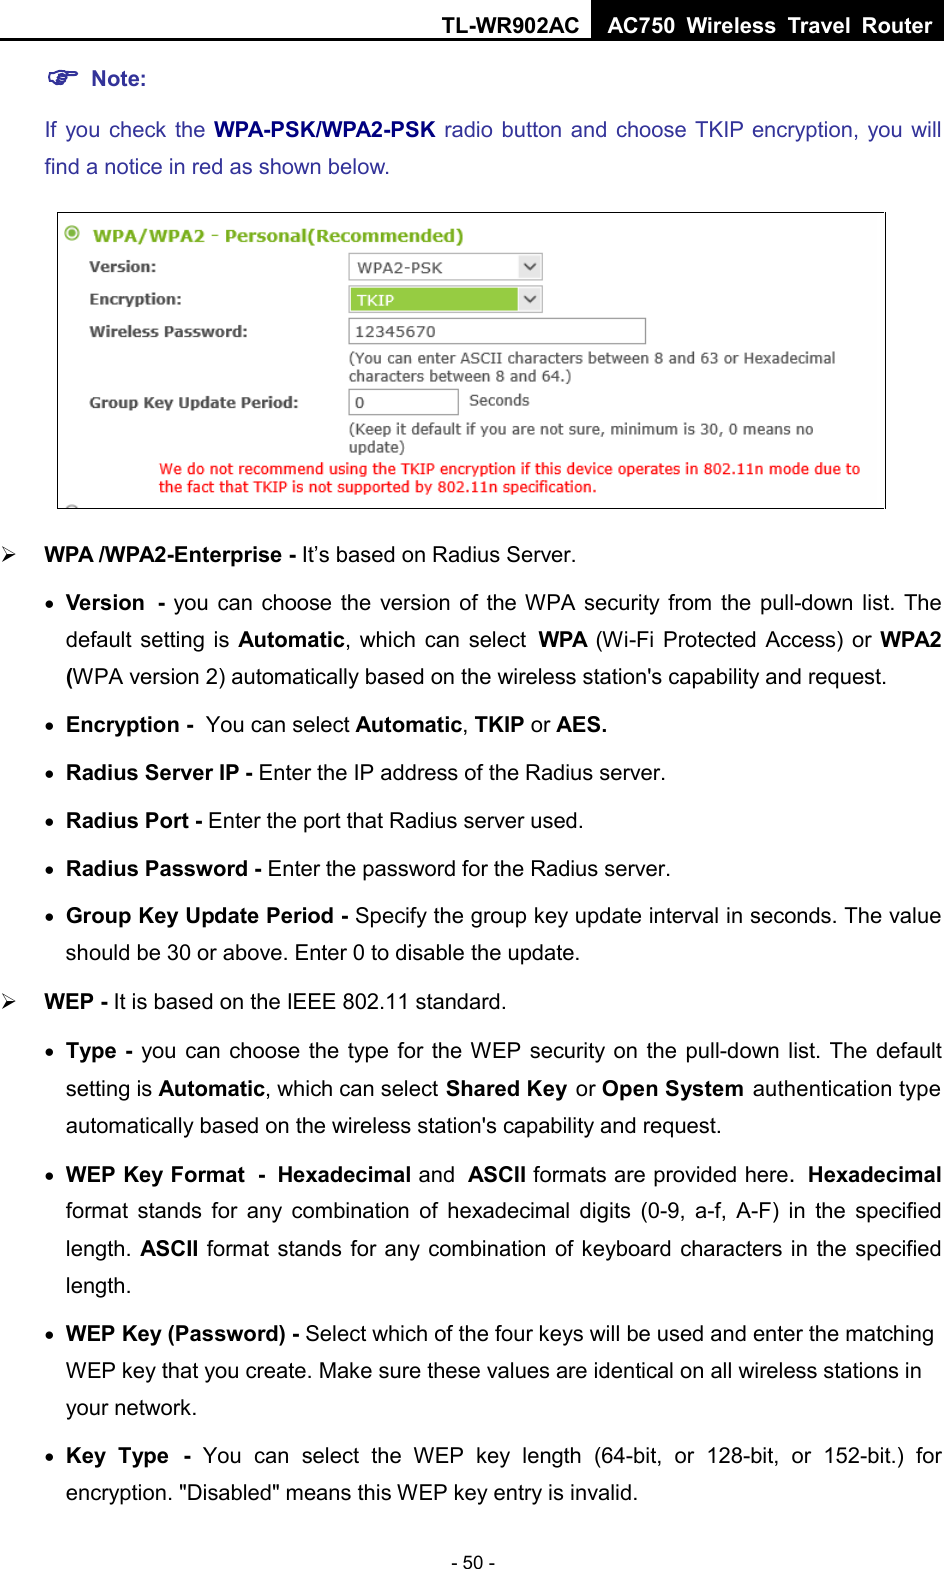 TL-WR902AC AC750  Wireless Travel Router  - 50 -  Note:   If you check  the  WPA-PSK/WPA2-PSK radio button and choose TKIP encryption, you will find a notice in red as shown below.   WPA /WPA2-Enterprise - It’s based on Radius Server. • Version - you can choose the version of the WPA security from the pull-down list. The default setting is Automatic, which can select WPA (Wi-Fi Protected Access) or  WPA2 (WPA version 2) automatically based on the wireless station&apos;s capability and request. • Encryption - You can select Automatic, TKIP or AES. • Radius Server IP - Enter the IP address of the Radius server. • Radius Port - Enter the port that Radius server used. • Radius Password - Enter the password for the Radius server. • Group Key Update Period - Specify the group key update interval in seconds. The value should be 30 or above. Enter 0 to disable the update.  WEP - It is based on the IEEE 802.11 standard.   • Type - you can choose the type for the WEP security on the pull-down list. The default setting is Automatic, which can select Shared Key or Open System authentication type automatically based on the wireless station&apos;s capability and request. • WEP Key Format - Hexadecimal and ASCII formats are provided here. Hexadecimal format stands for any combination of hexadecimal digits (0-9, a-f, A-F) in the specified length. ASCII format stands for any combination of keyboard characters in the specified length.   • WEP Key (Password) - Select which of the four keys will be used and enter the matching WEP key that you create. Make sure these values are identical on all wireless stations in your network. • Key Type - You can select the WEP key length (64-bit, or 128-bit, or 152-bit.) for encryption. &quot;Disabled&quot; means this WEP key entry is invalid. 